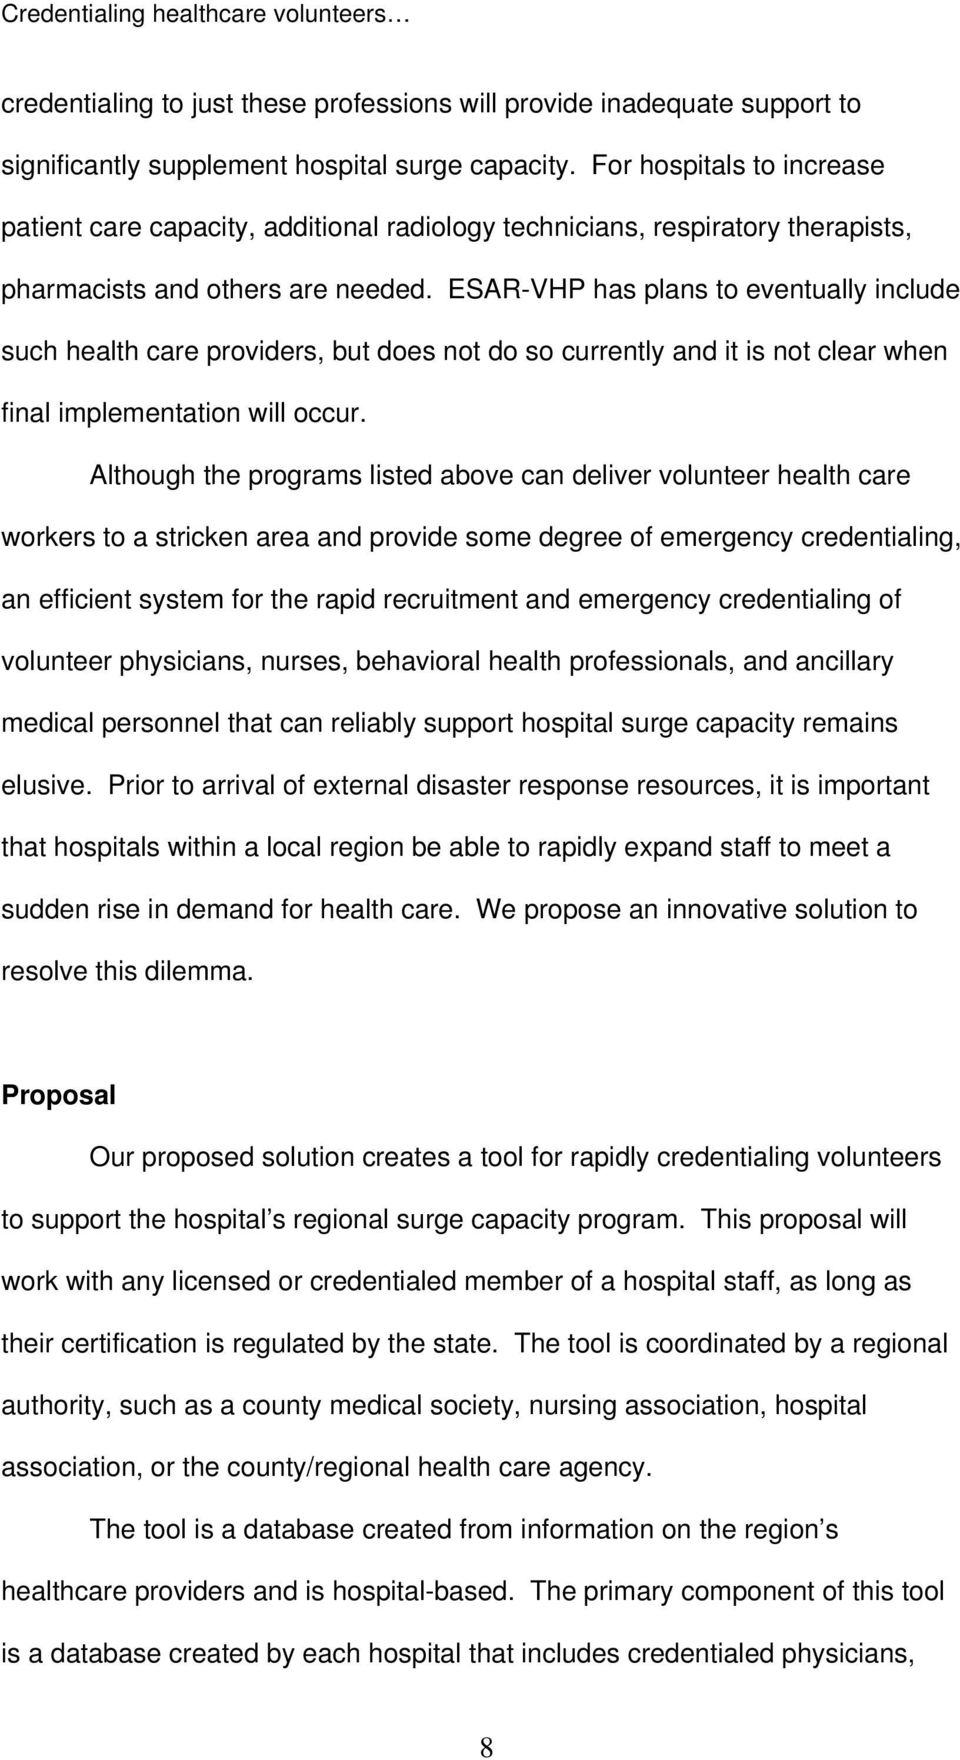 ESAR-VHP has plans to eventually include such health care providers, but does not do so currently and it is not clear when final implementation will occur.